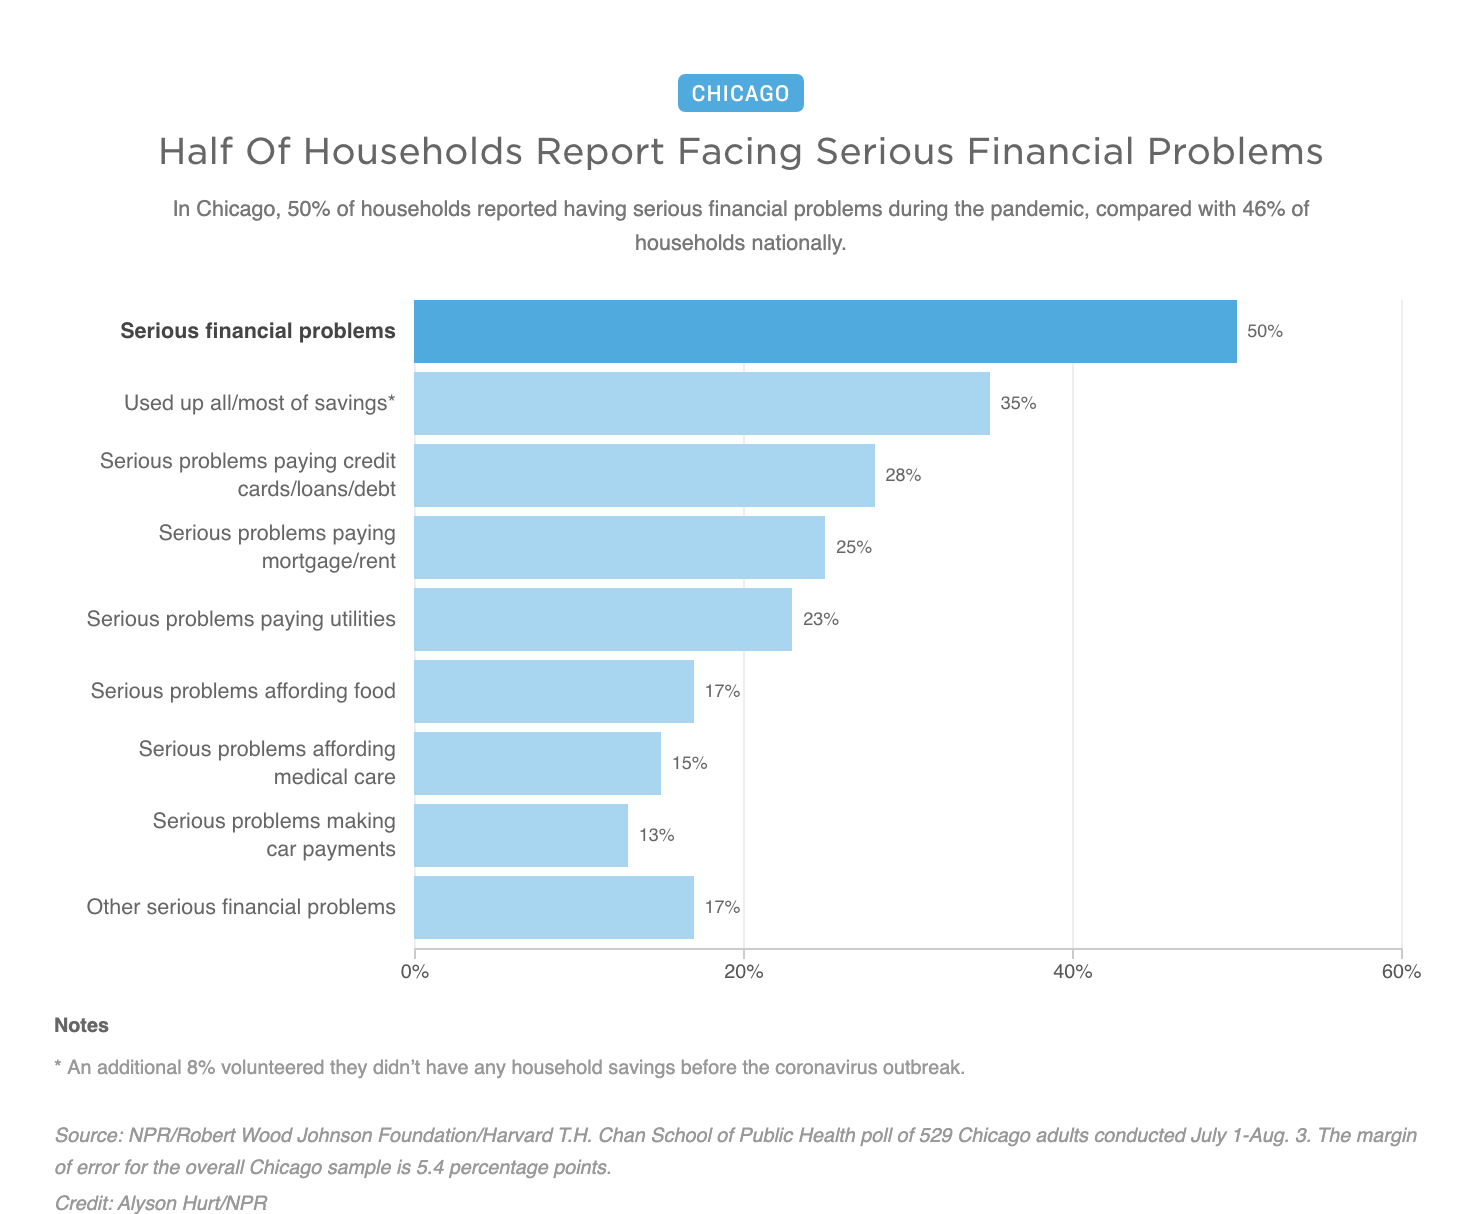 Half Of Households Report Facing Serious Financial Problems